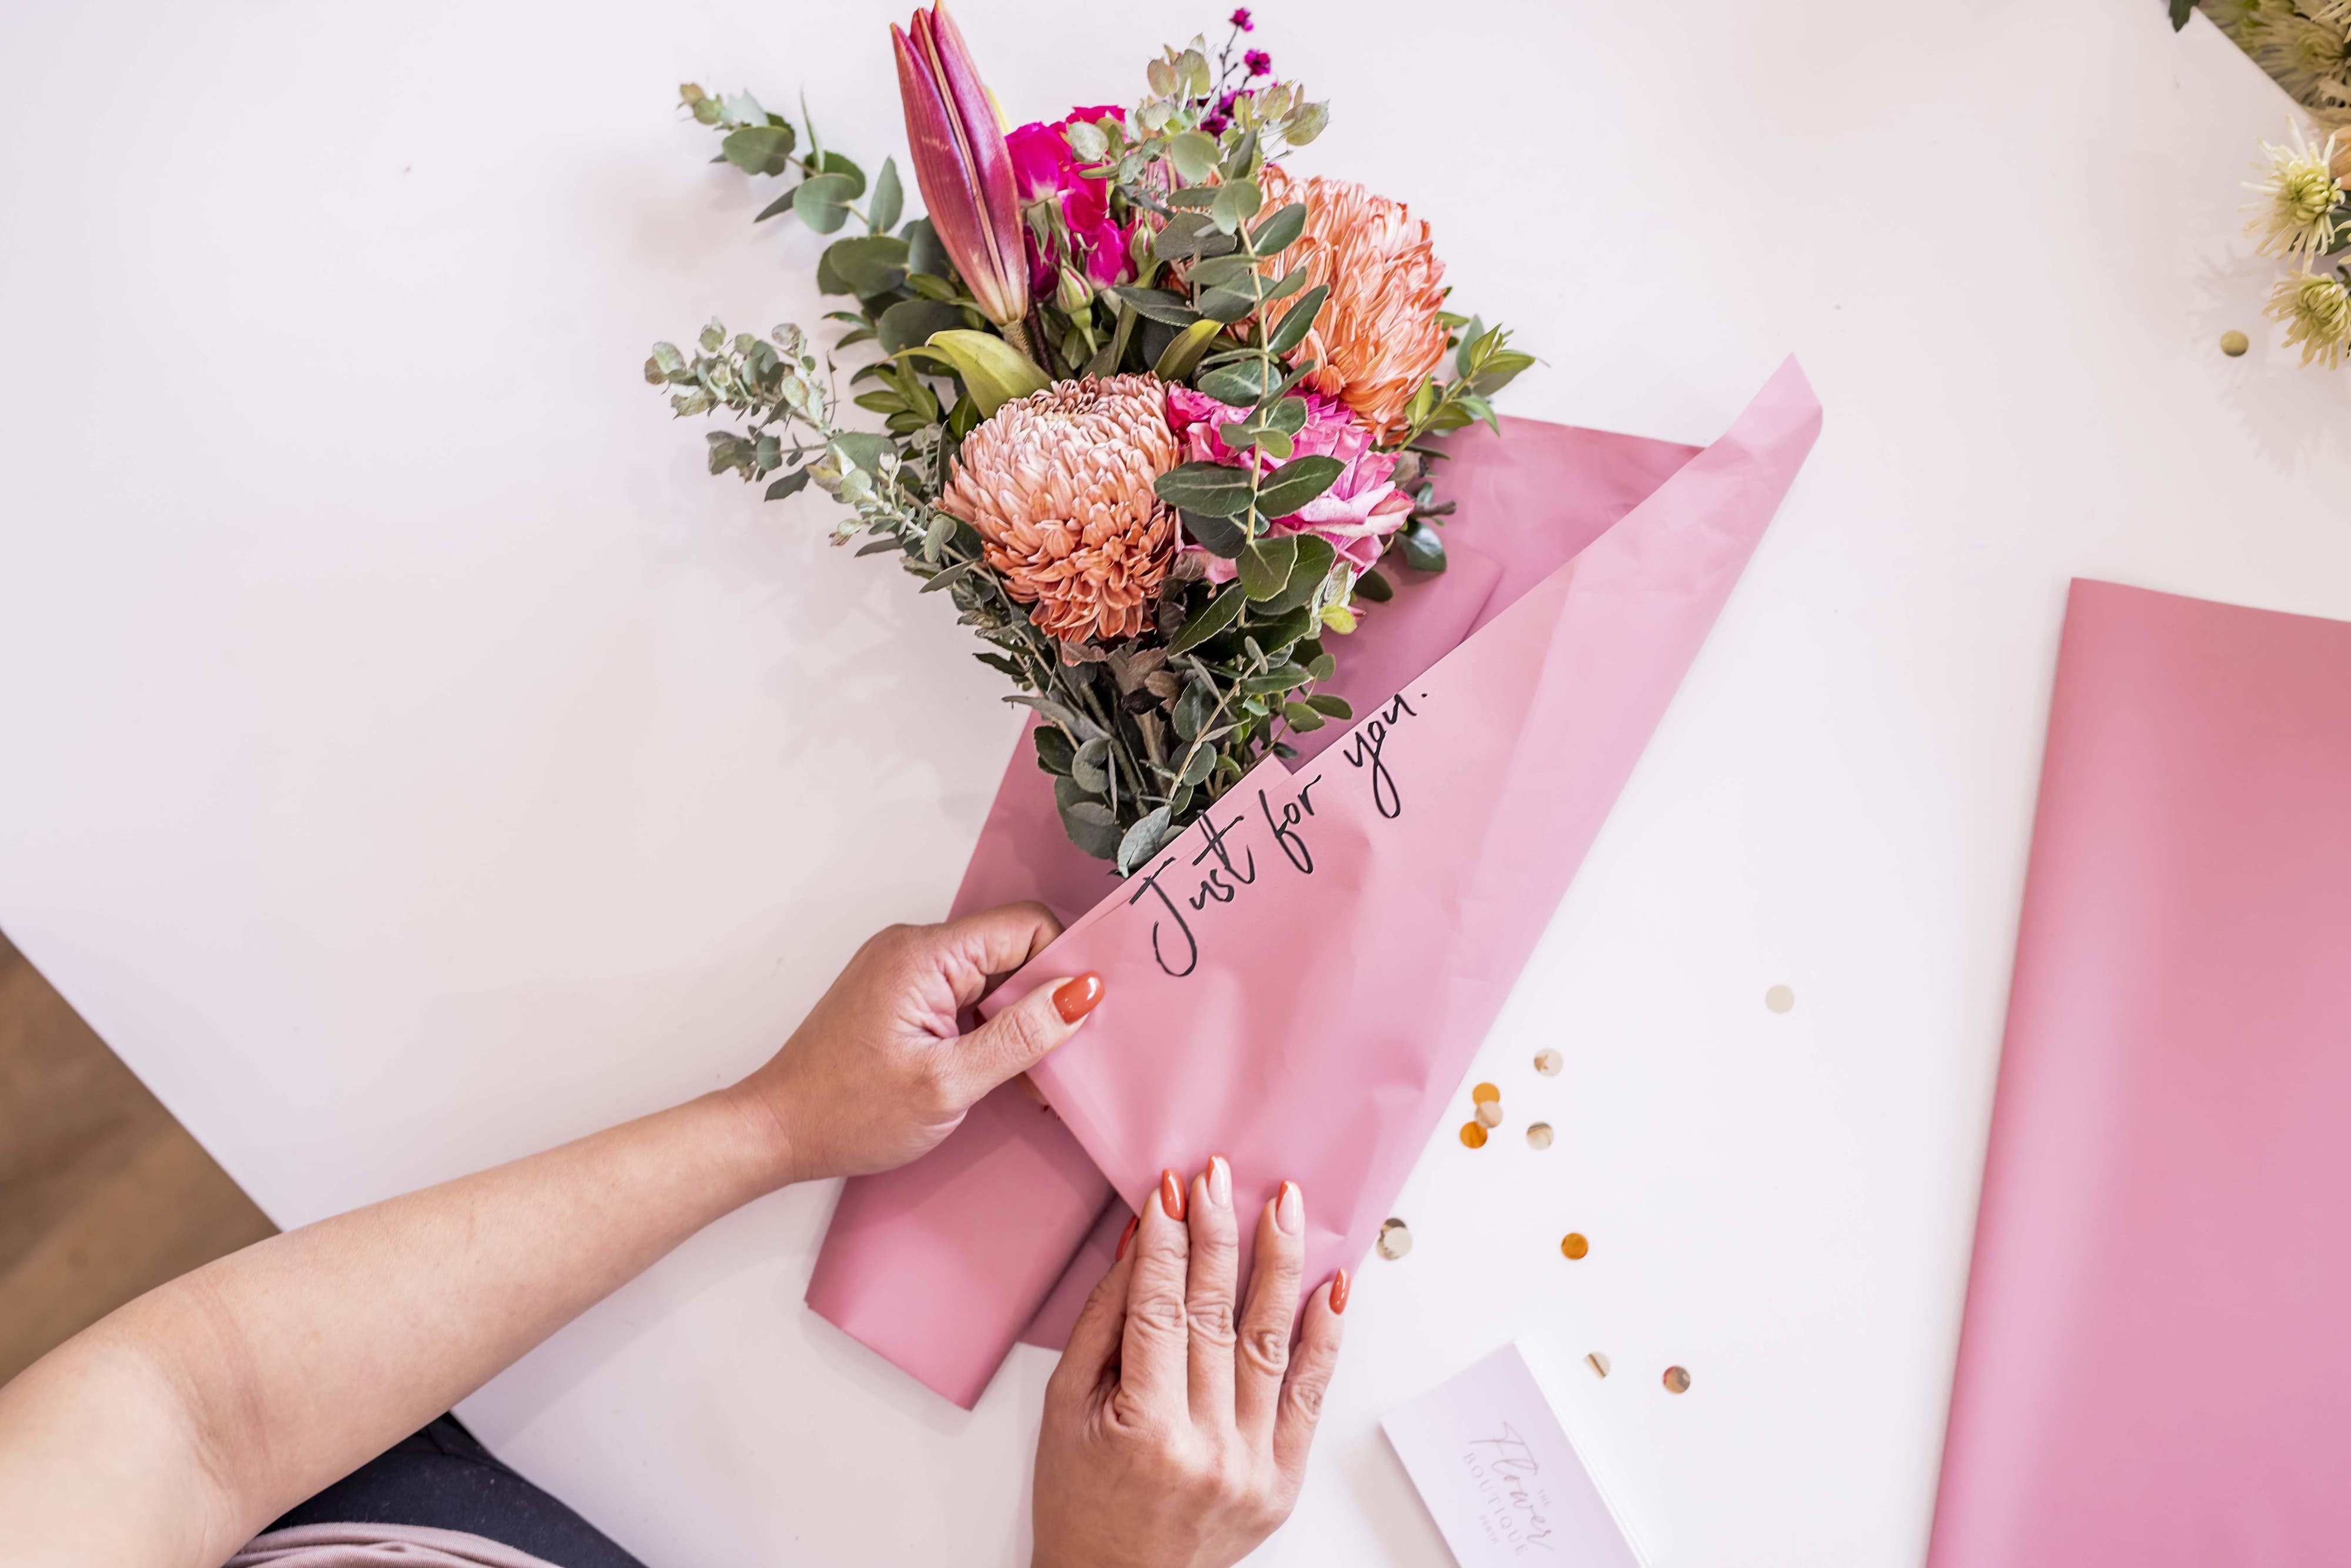 Florist creating a bouquet with a message on it saying "Just for you" , The Flower Boutique, Flower Delivery Perth